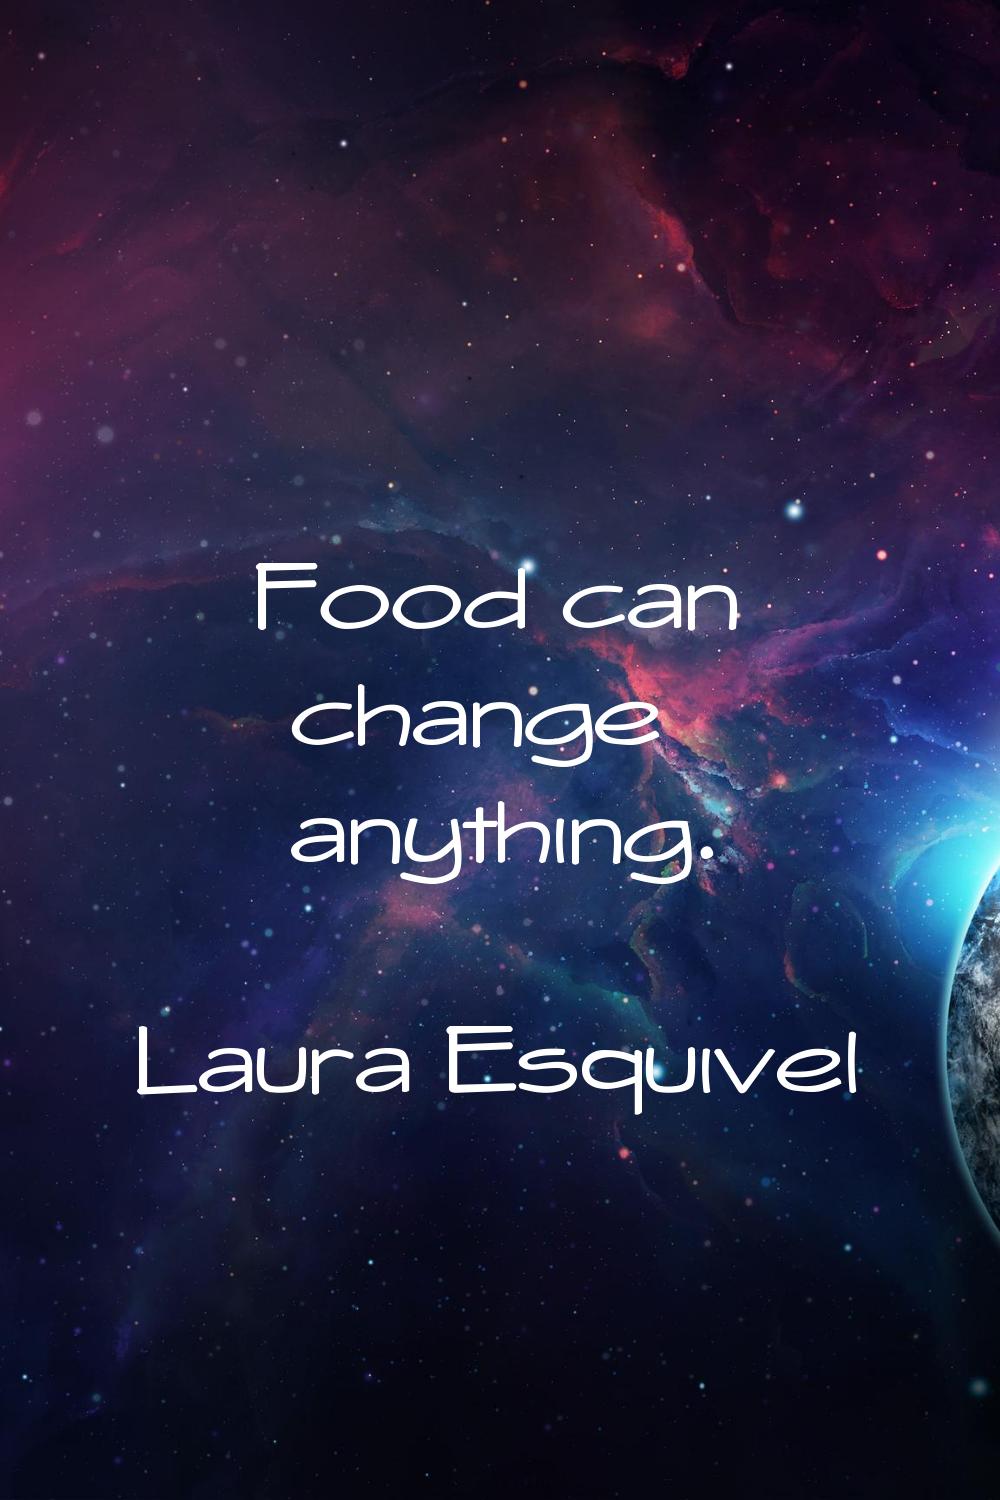 Food can change anything.